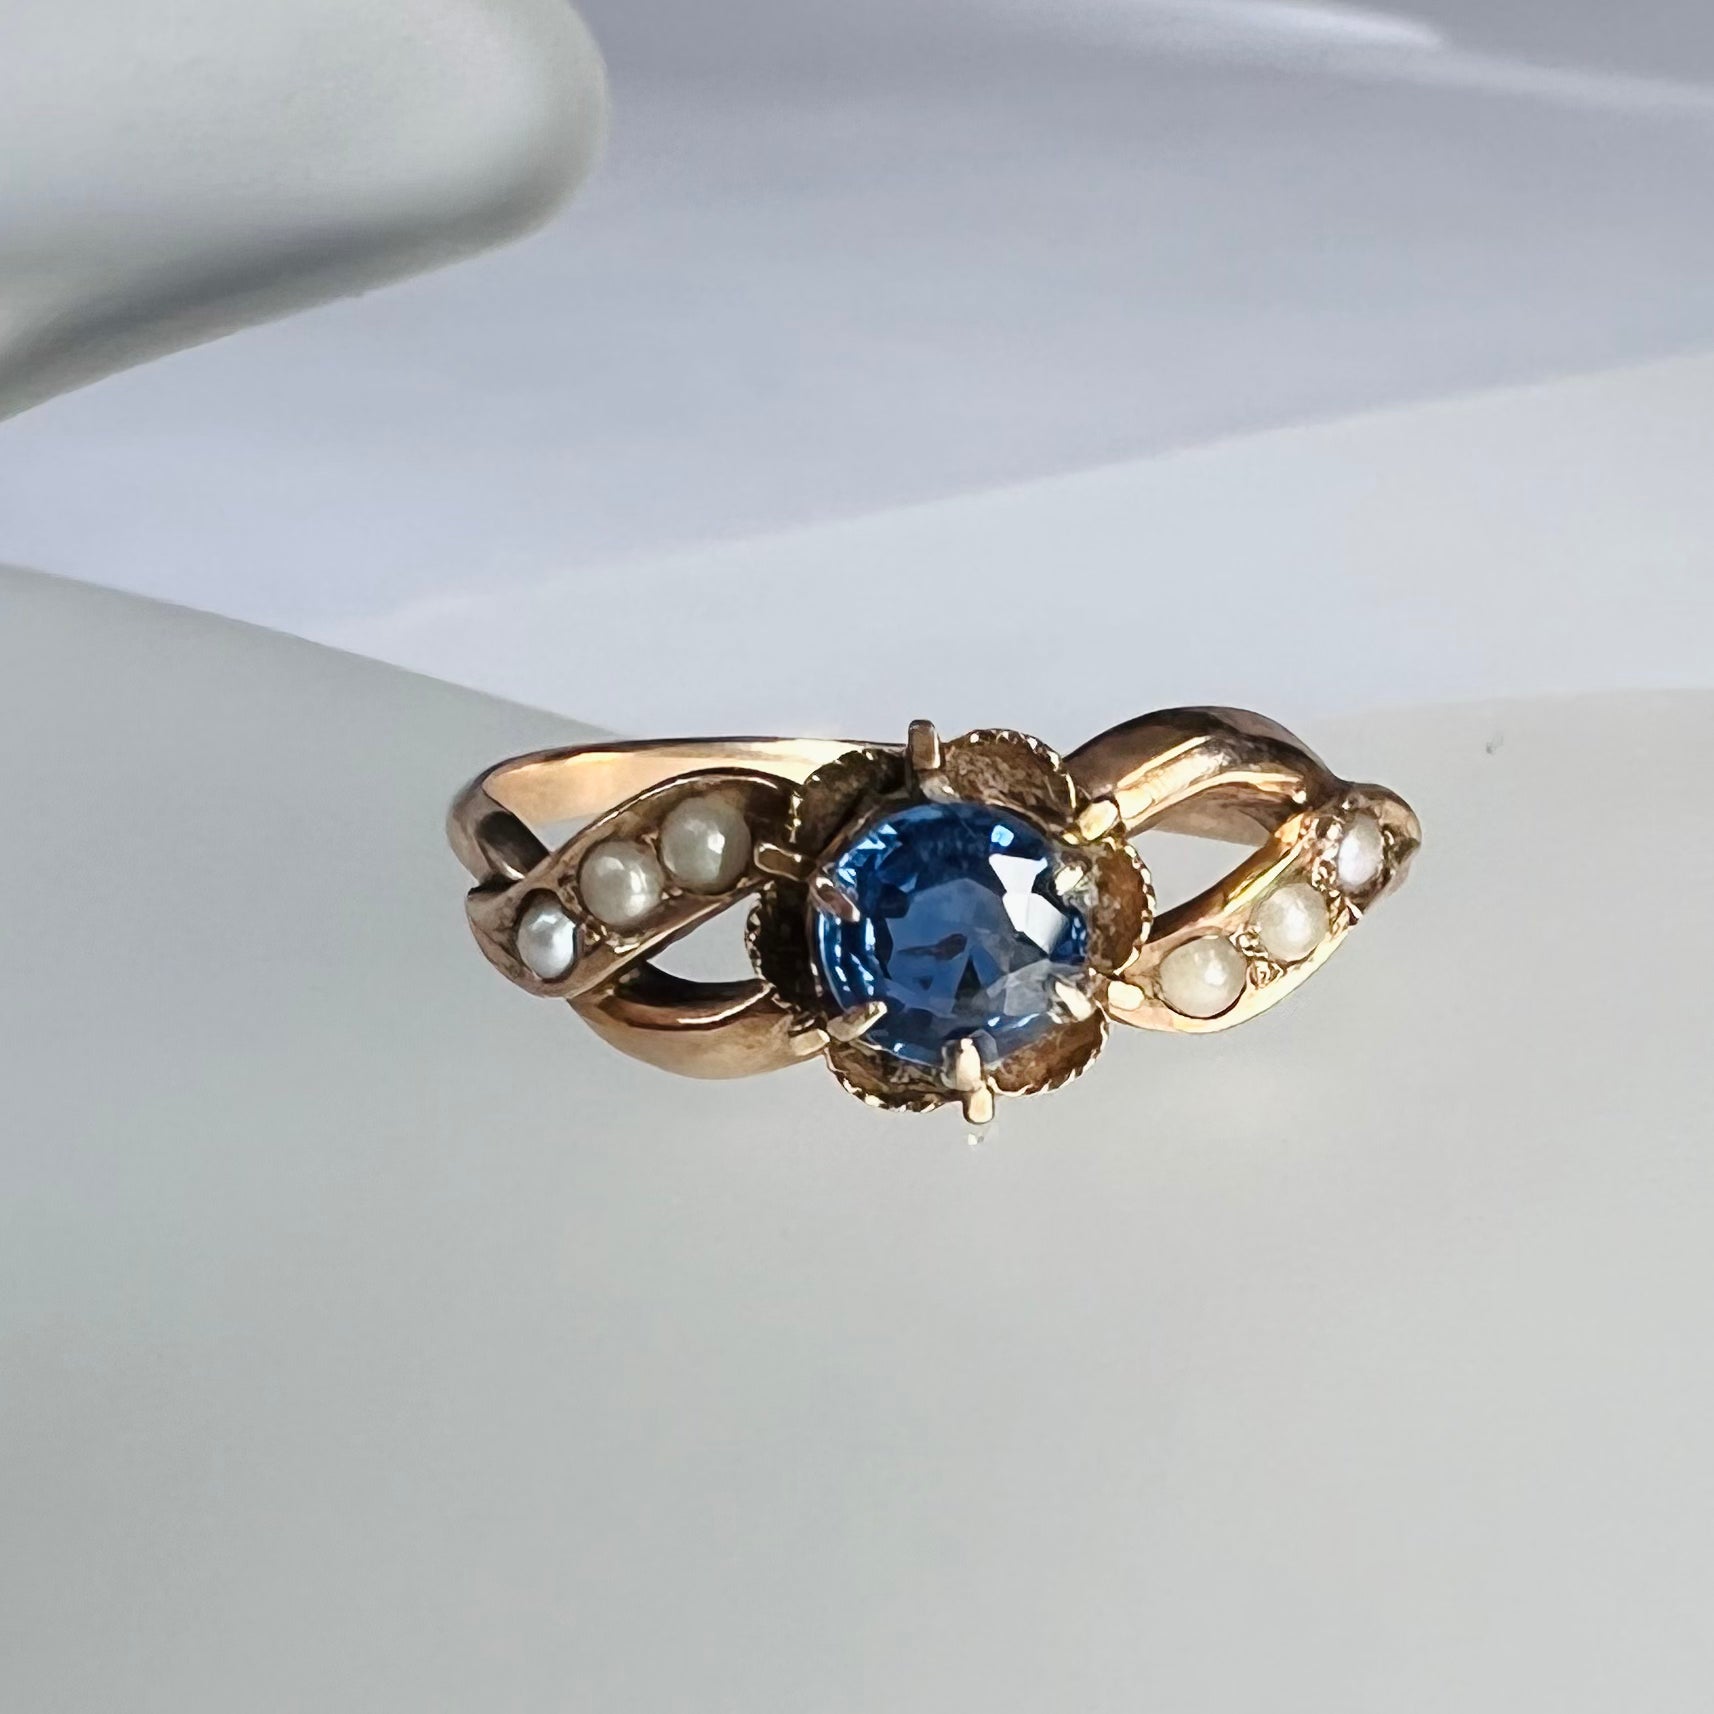 Antique 10K Rose Gold Sapphire and Pearl Ring Size 6.5